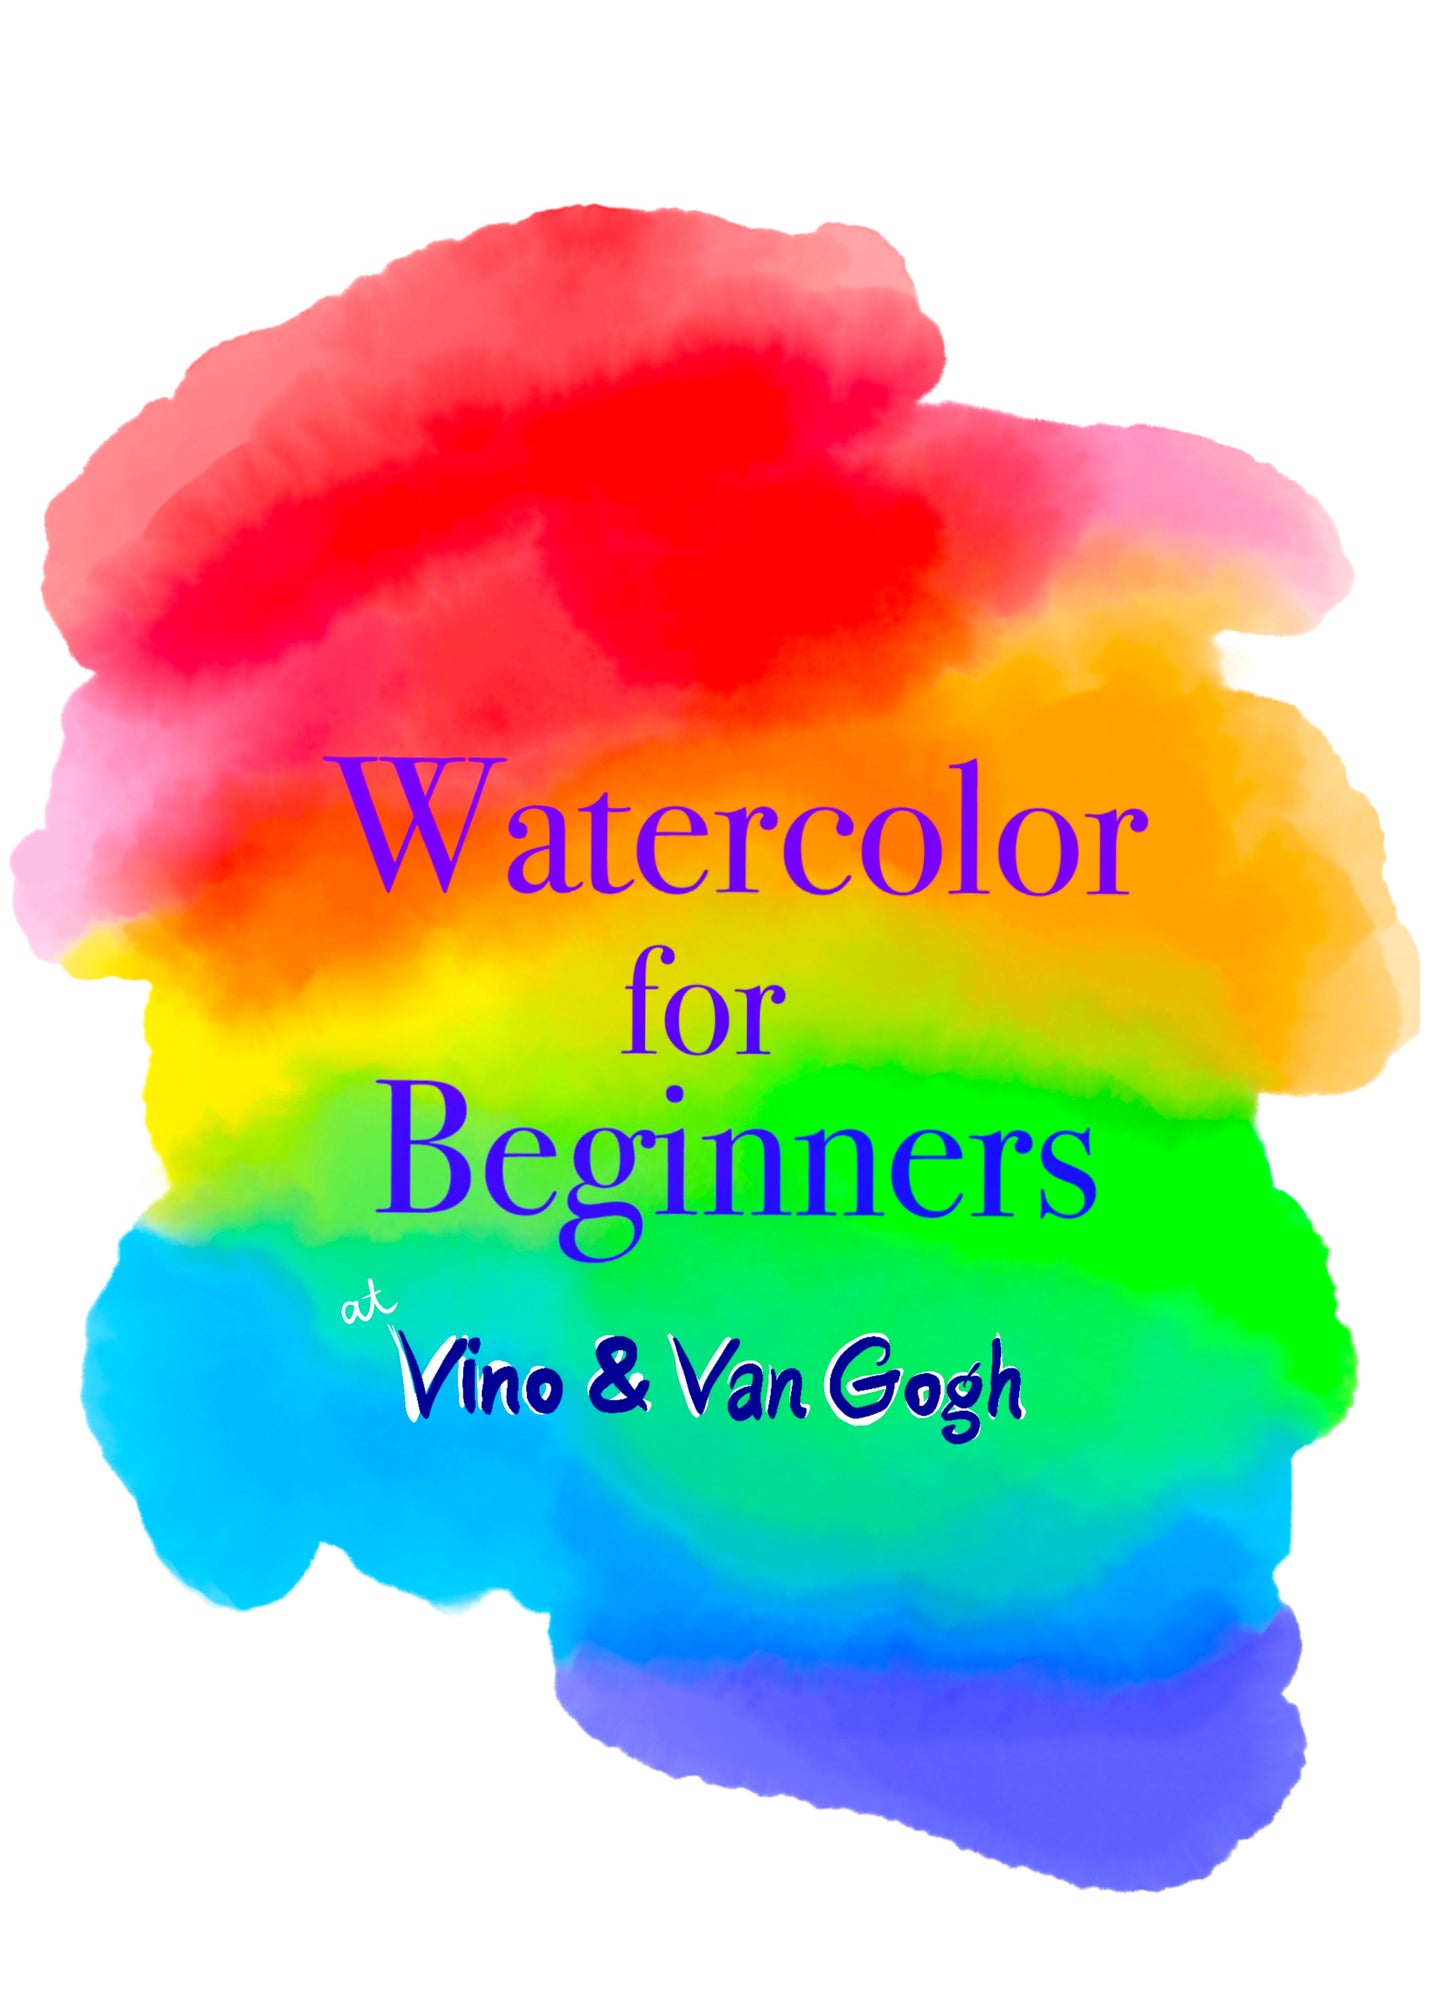 Watercolor for Beginners (A Workshop)!